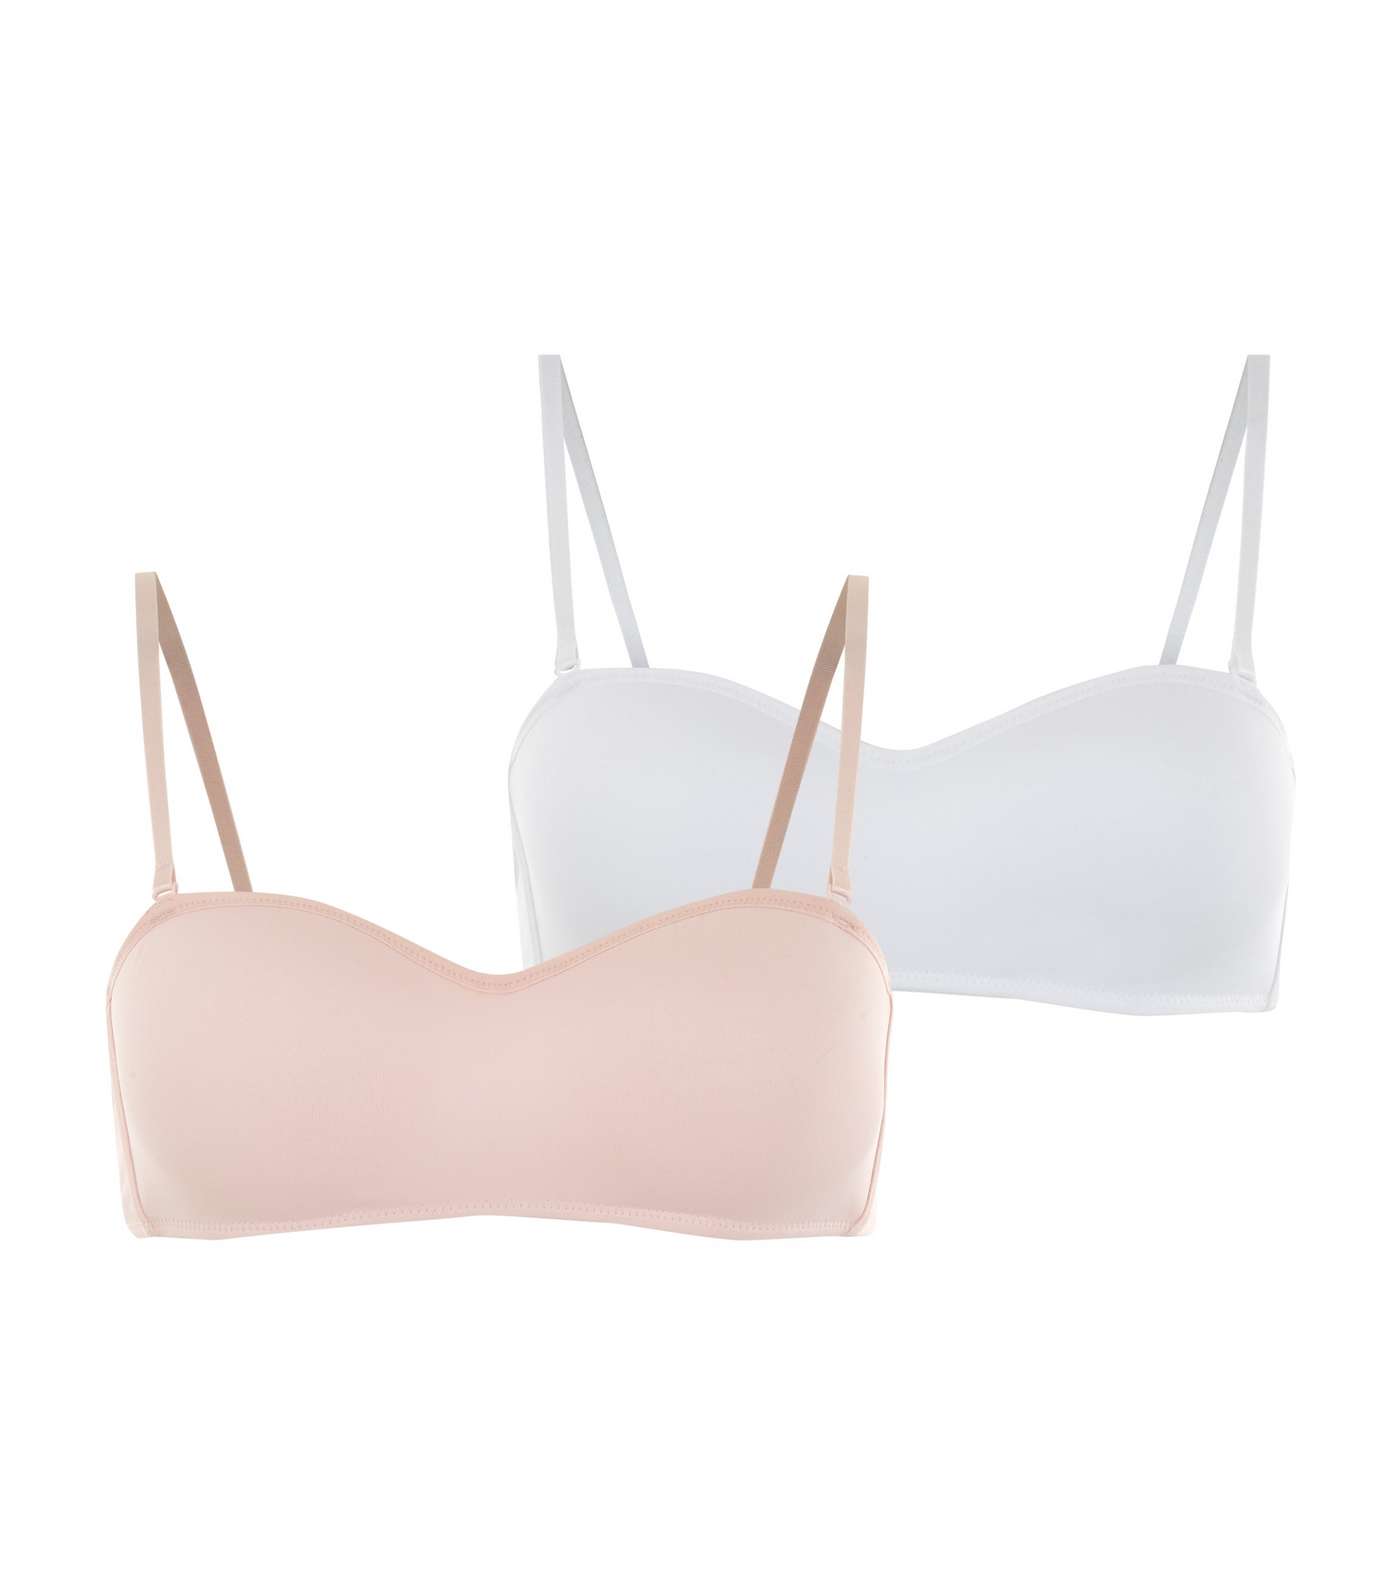 Girls 2 Pack White and Pink Bandeaus